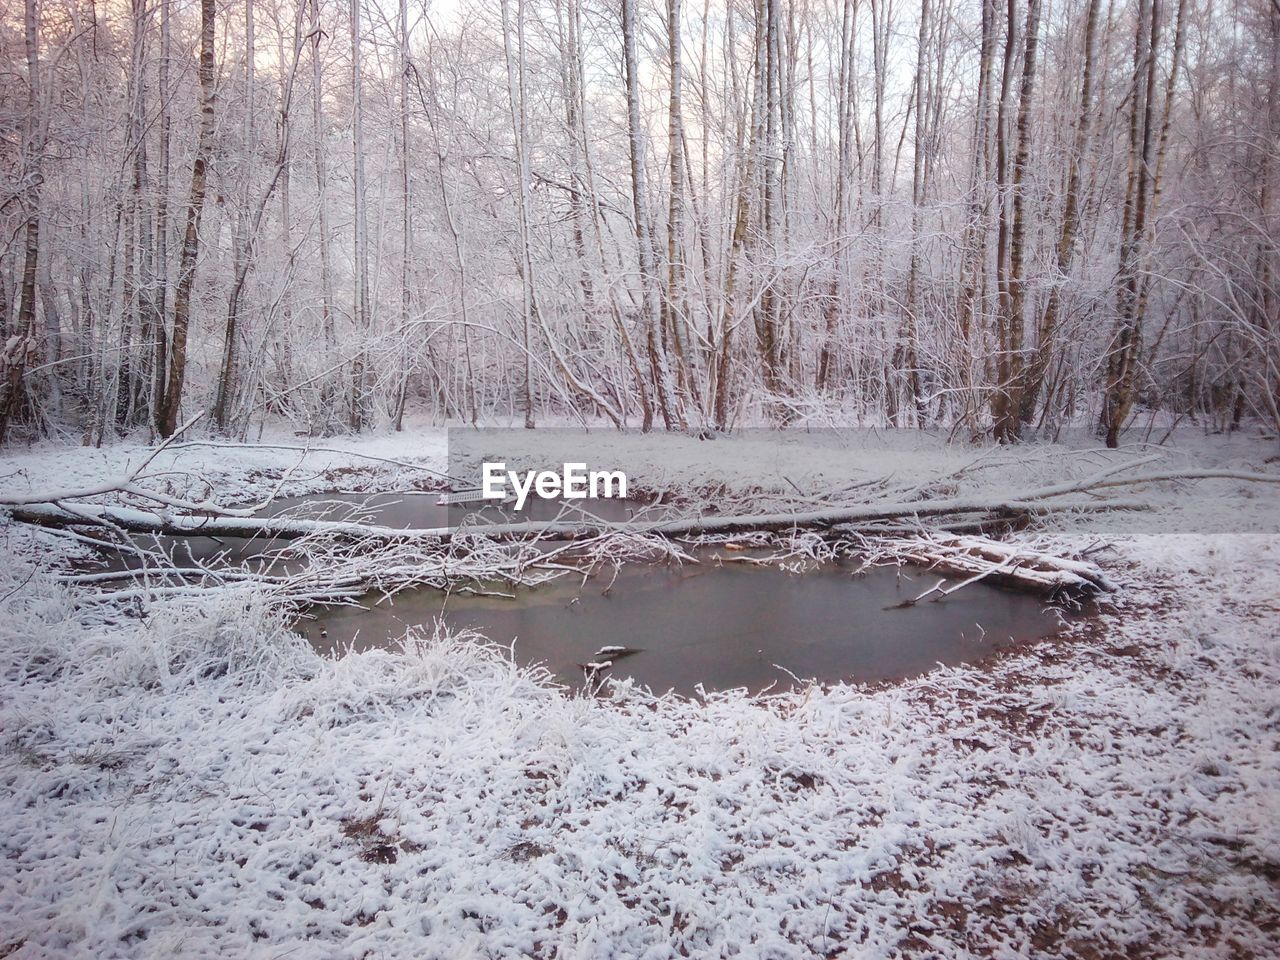 VIEW OF FROZEN LAKE IN FOREST